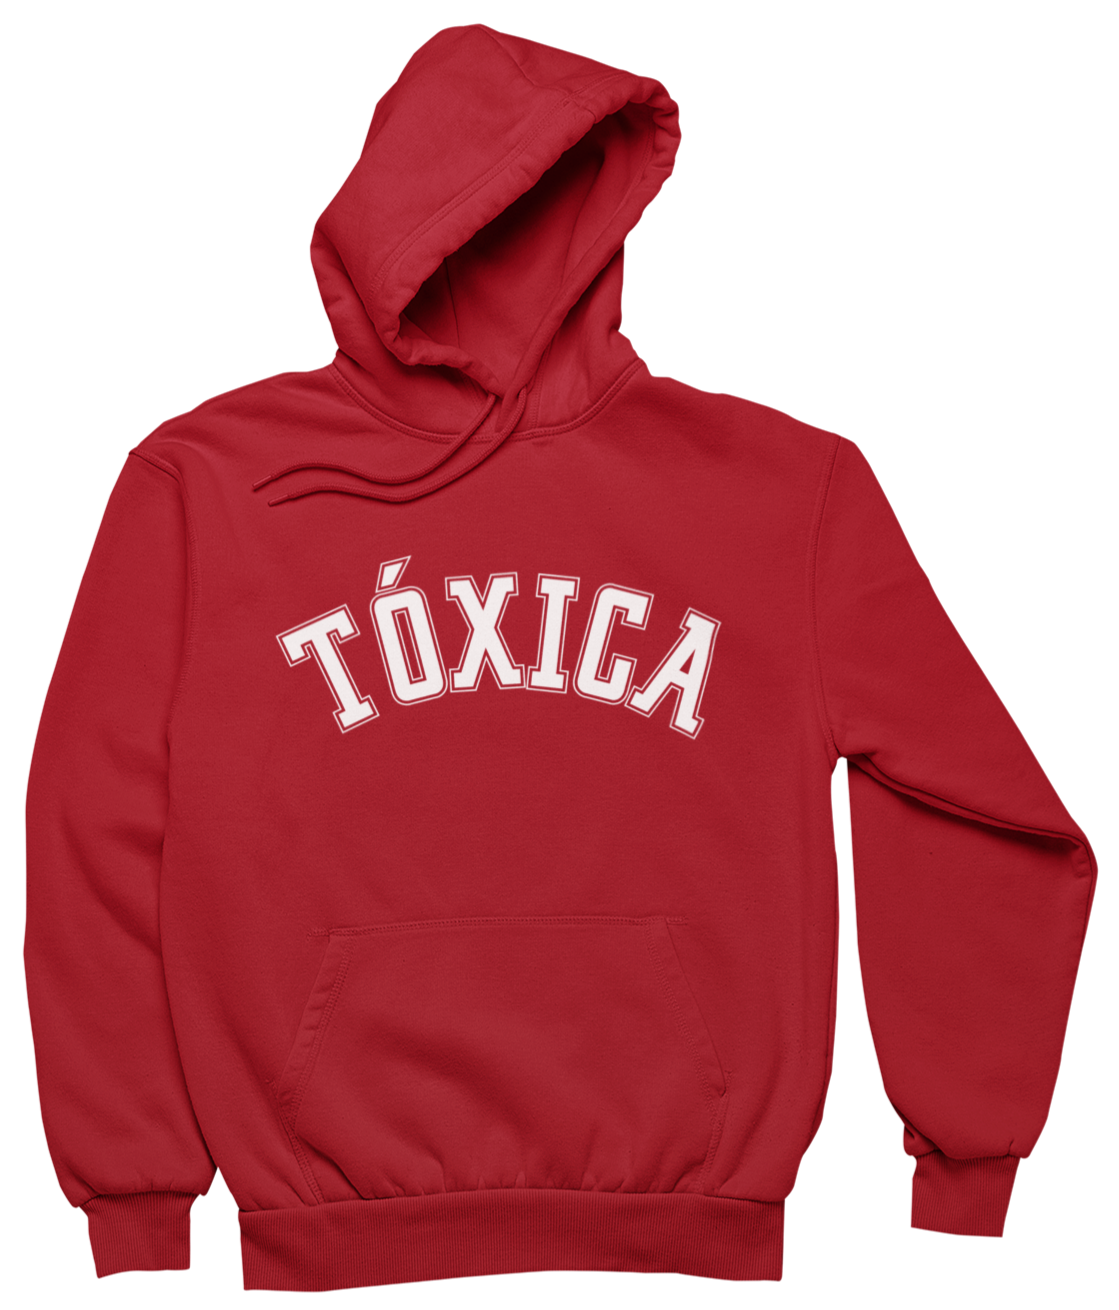 Red spanish hoodie sweatshirt for Latina women with the word 'Toxica' written in white varsity lettering